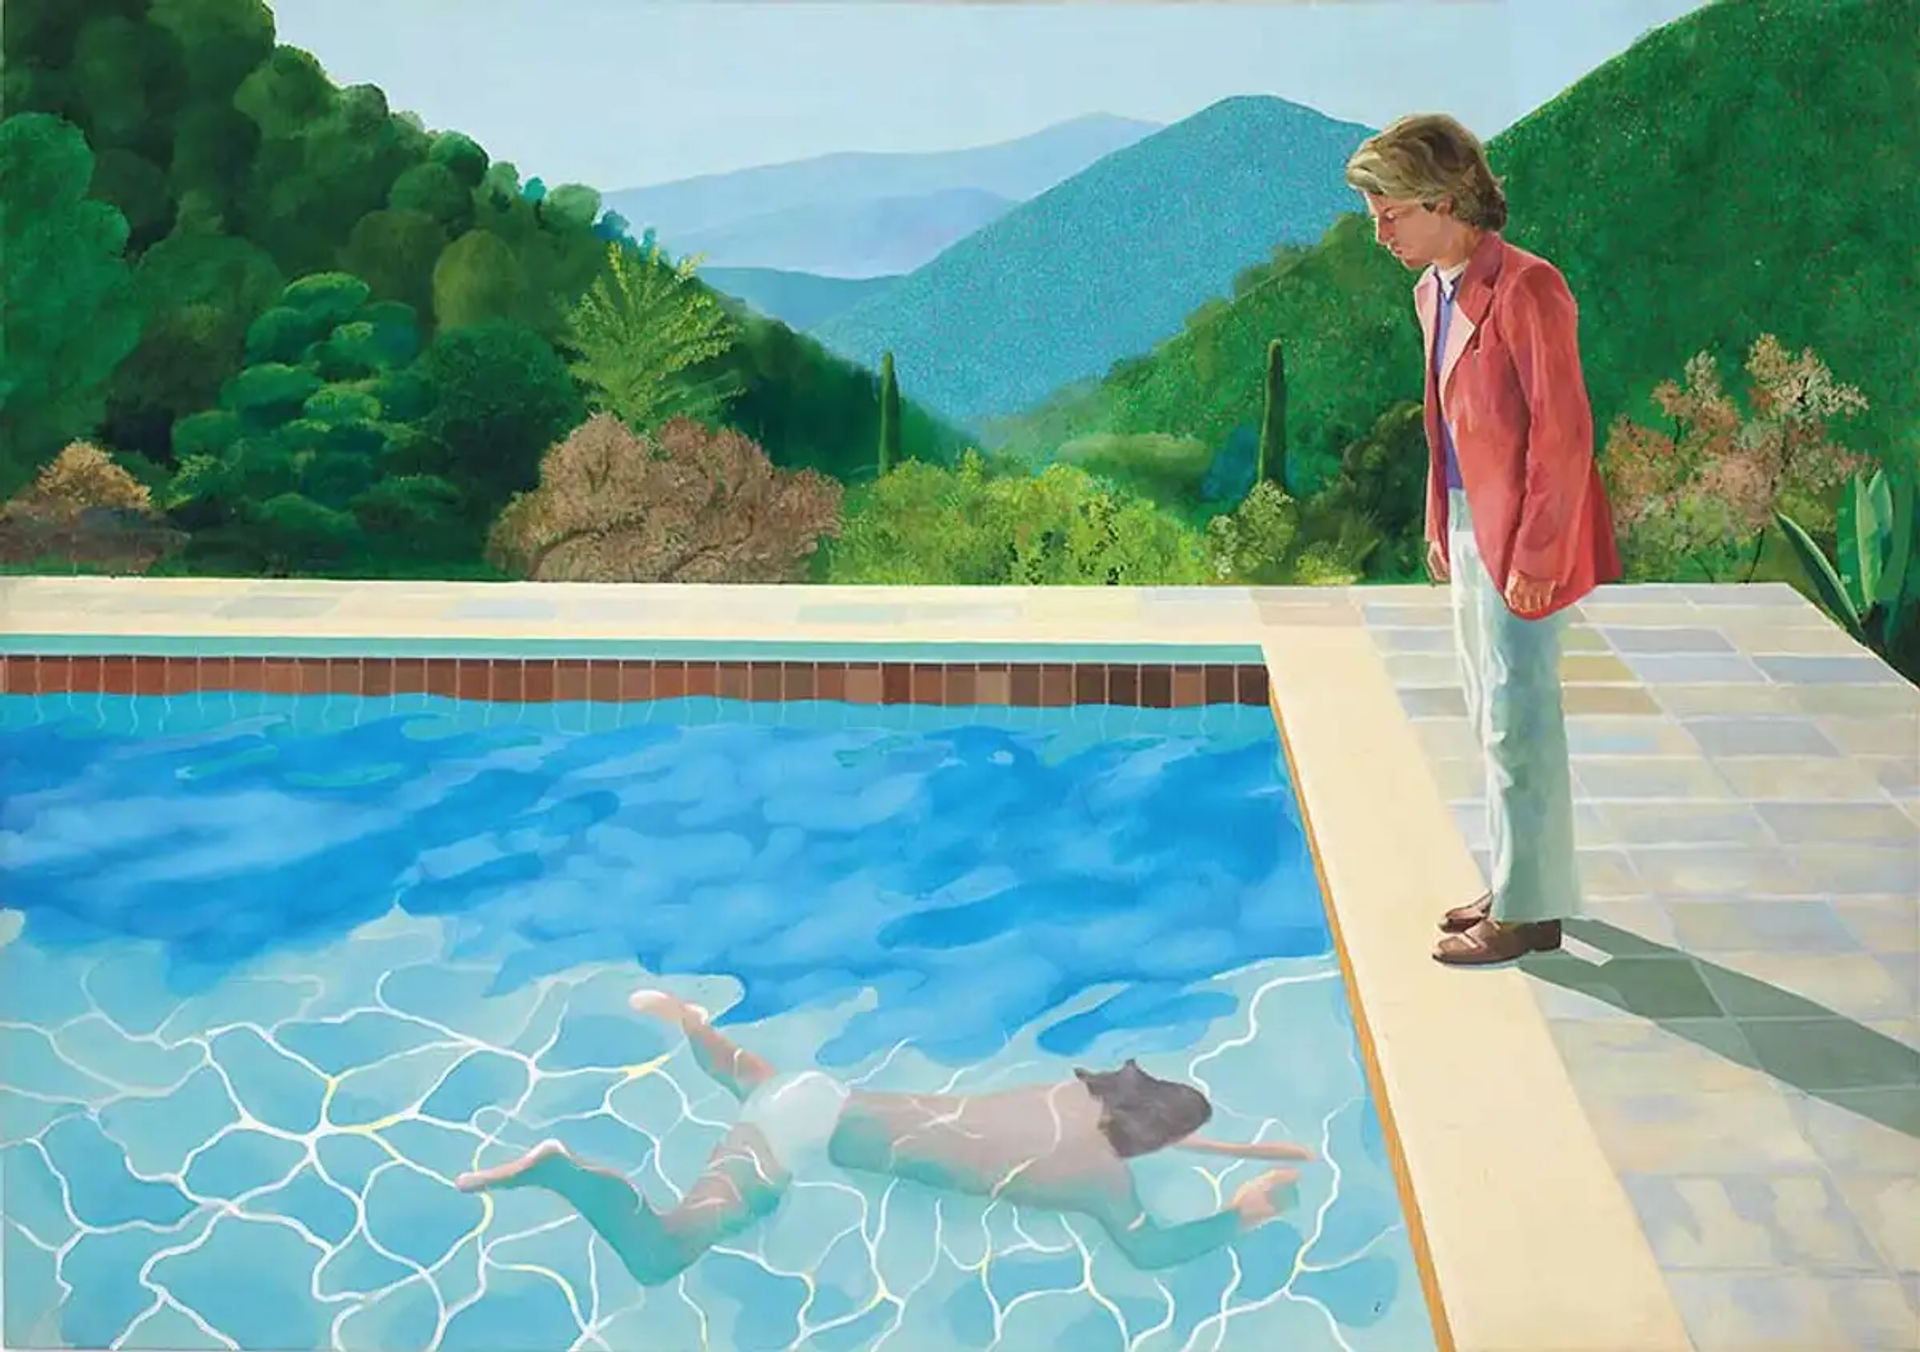 Man leaning over pool to watch someone swim